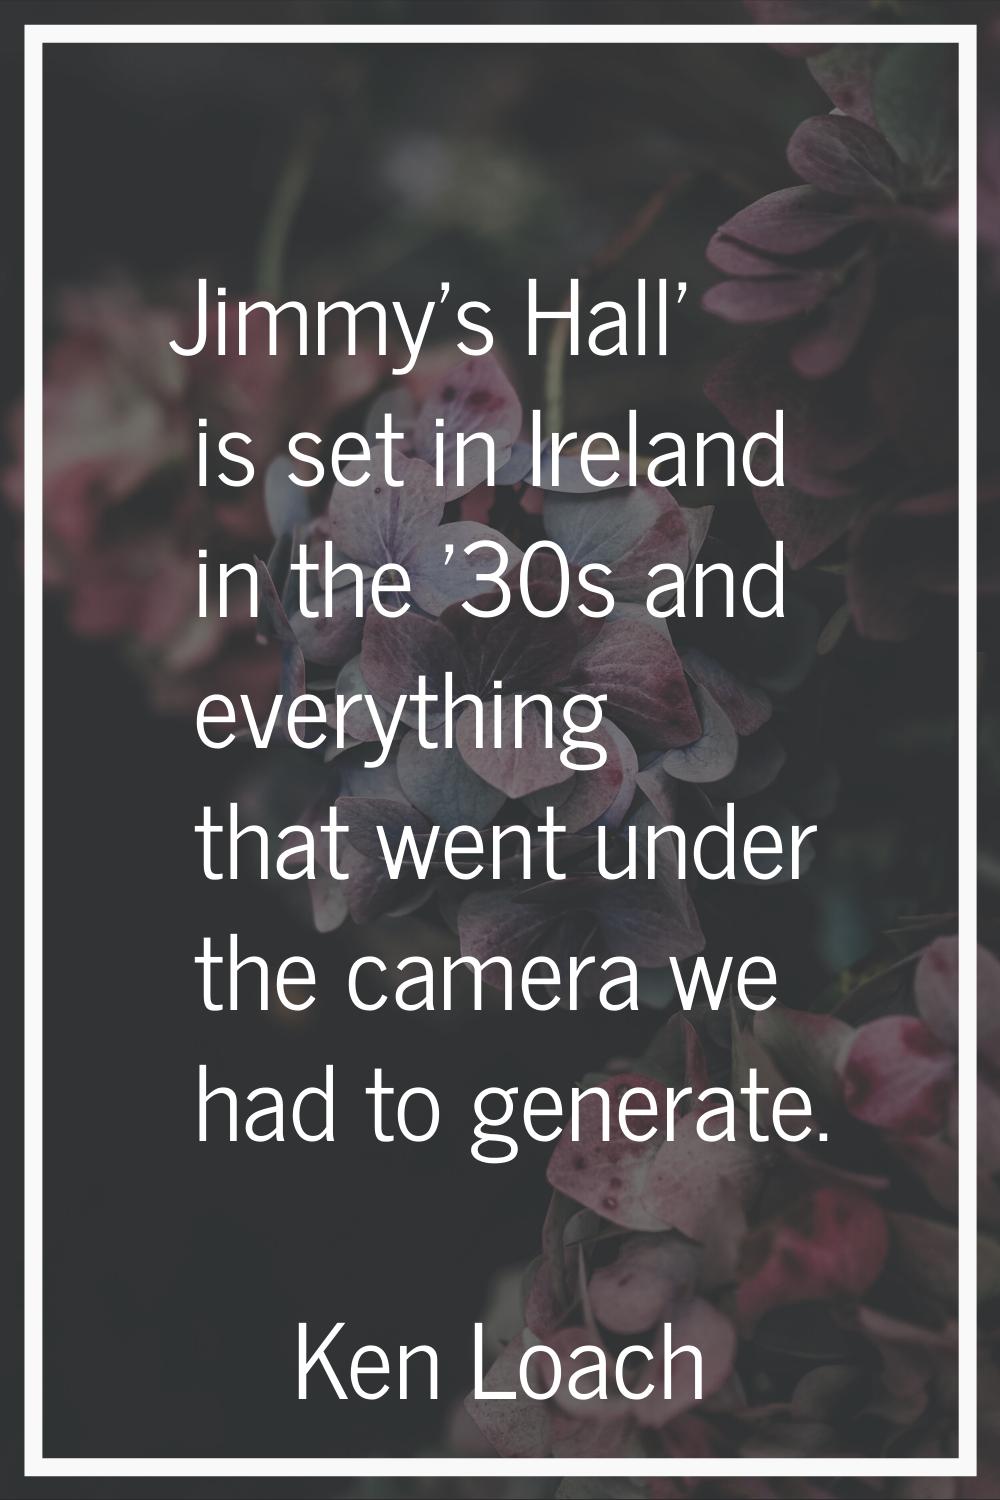 Jimmy's Hall' is set in Ireland in the '30s and everything that went under the camera we had to gen